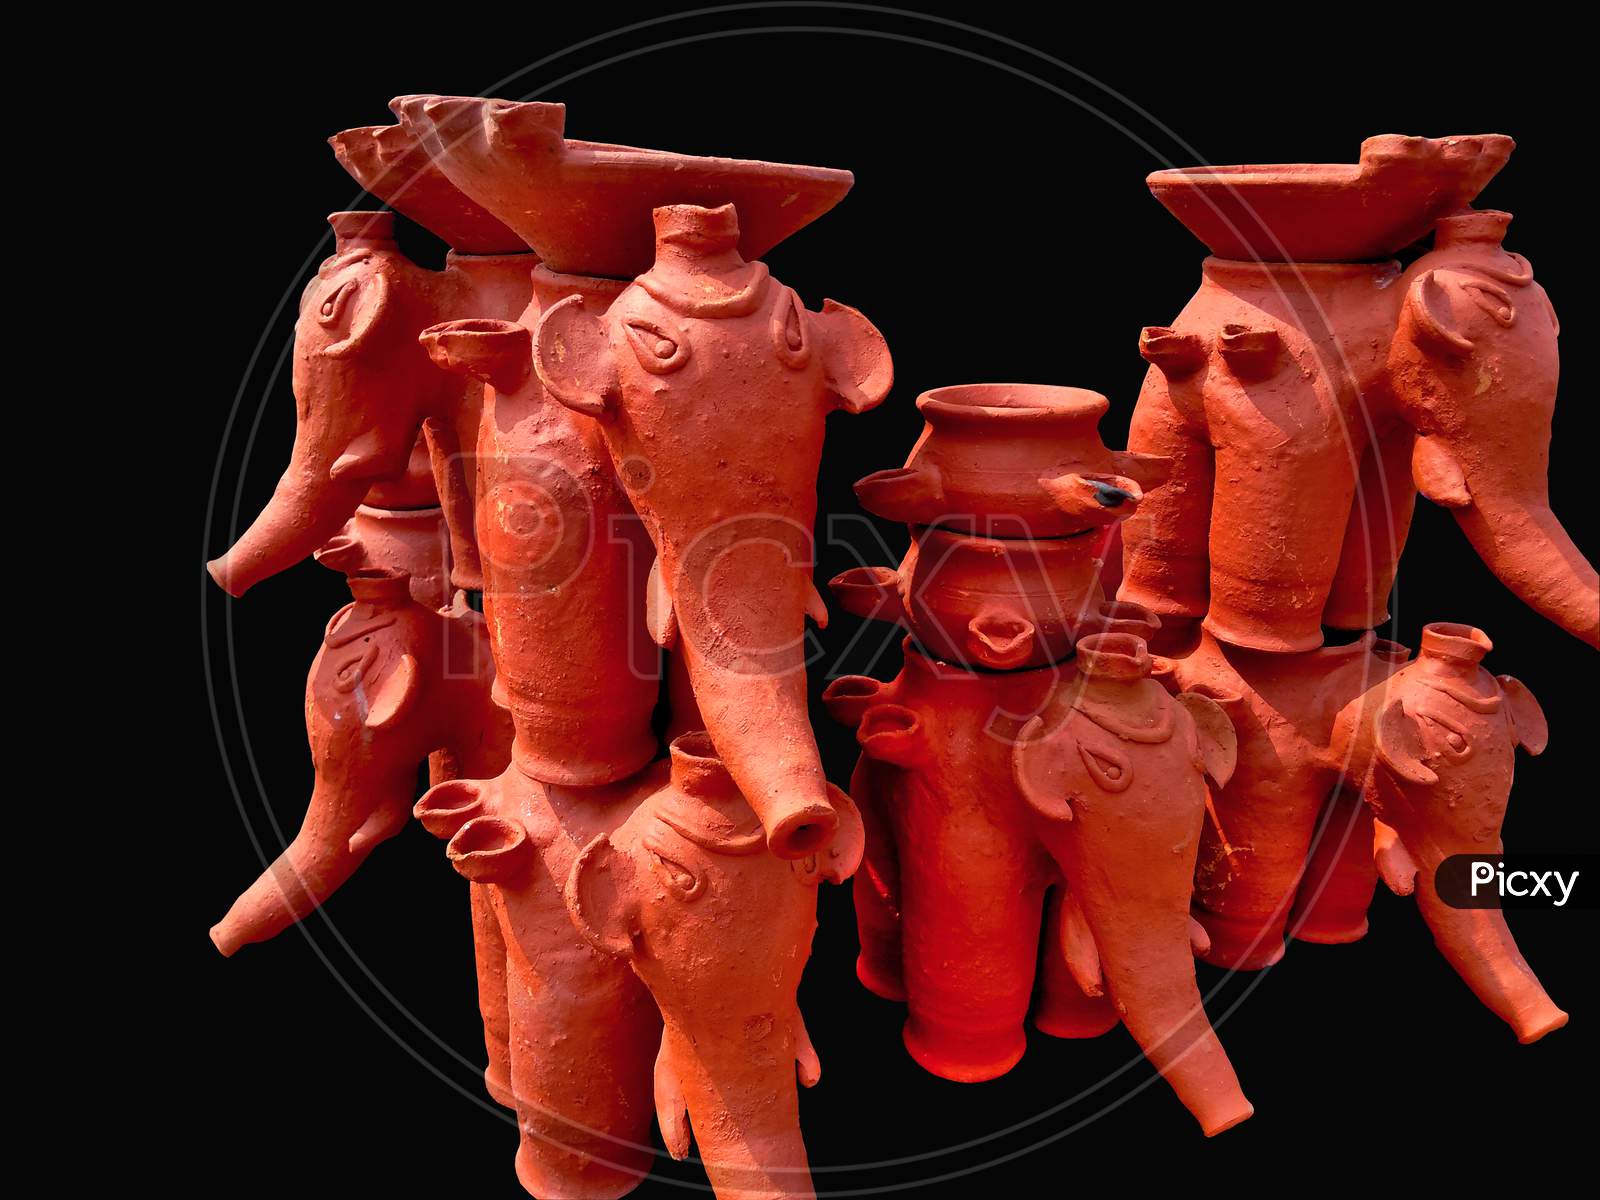 Clay Craft, Elephant Sculpture Made Of Clay Or Soil. Appliances Made From Clay. Handmade Clay Sculpture.